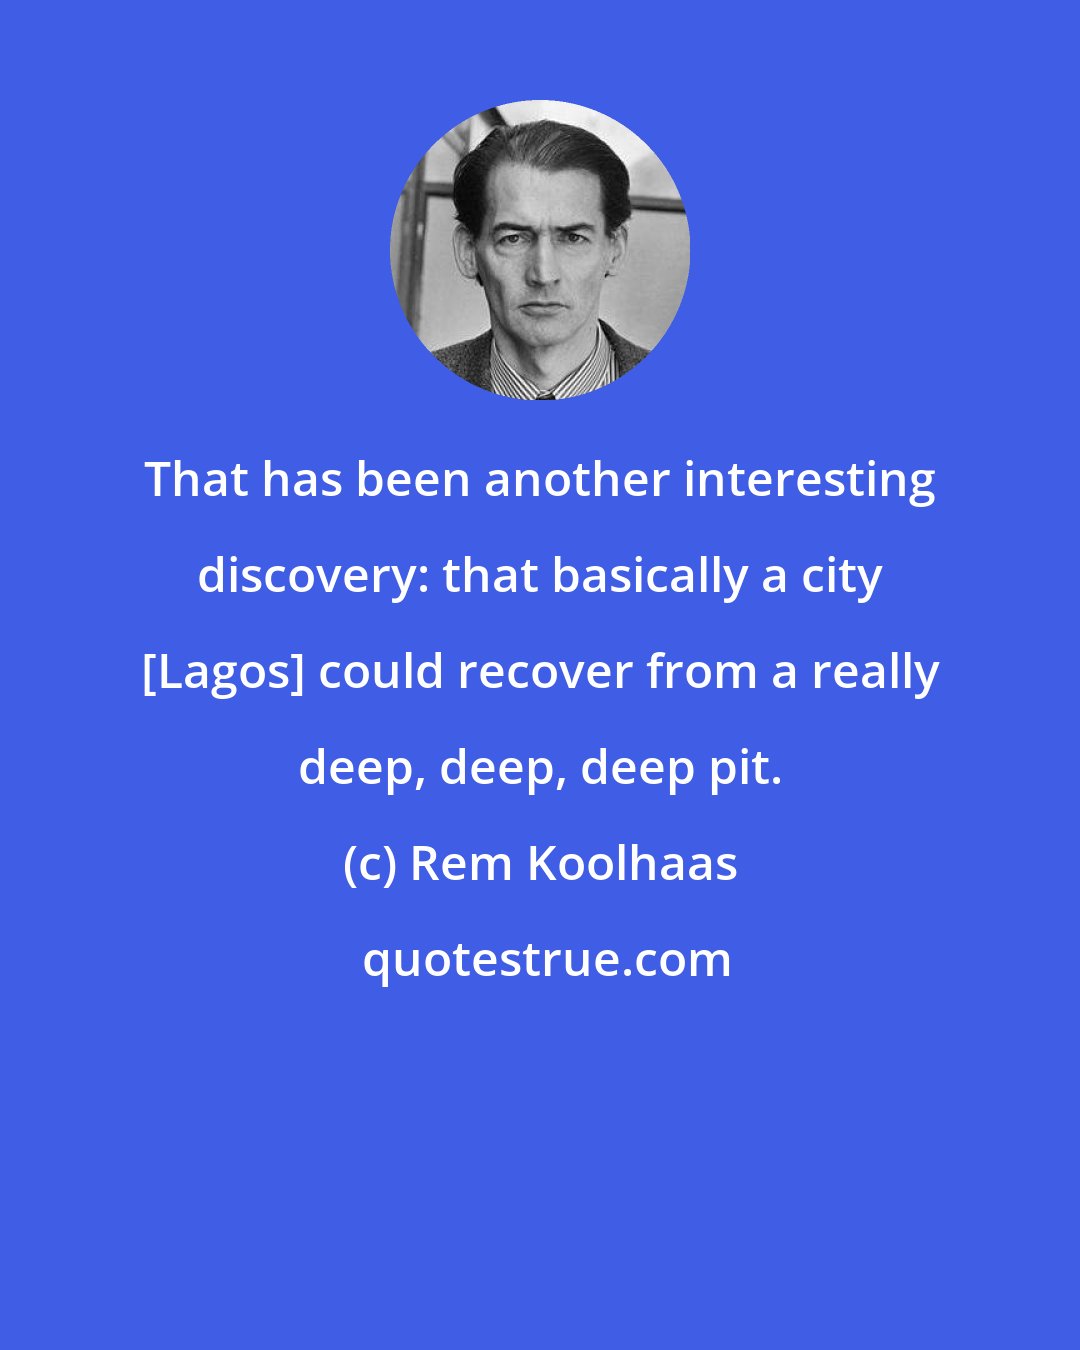 Rem Koolhaas: That has been another interesting discovery: that basically a city [Lagos] could recover from a really deep, deep, deep pit.